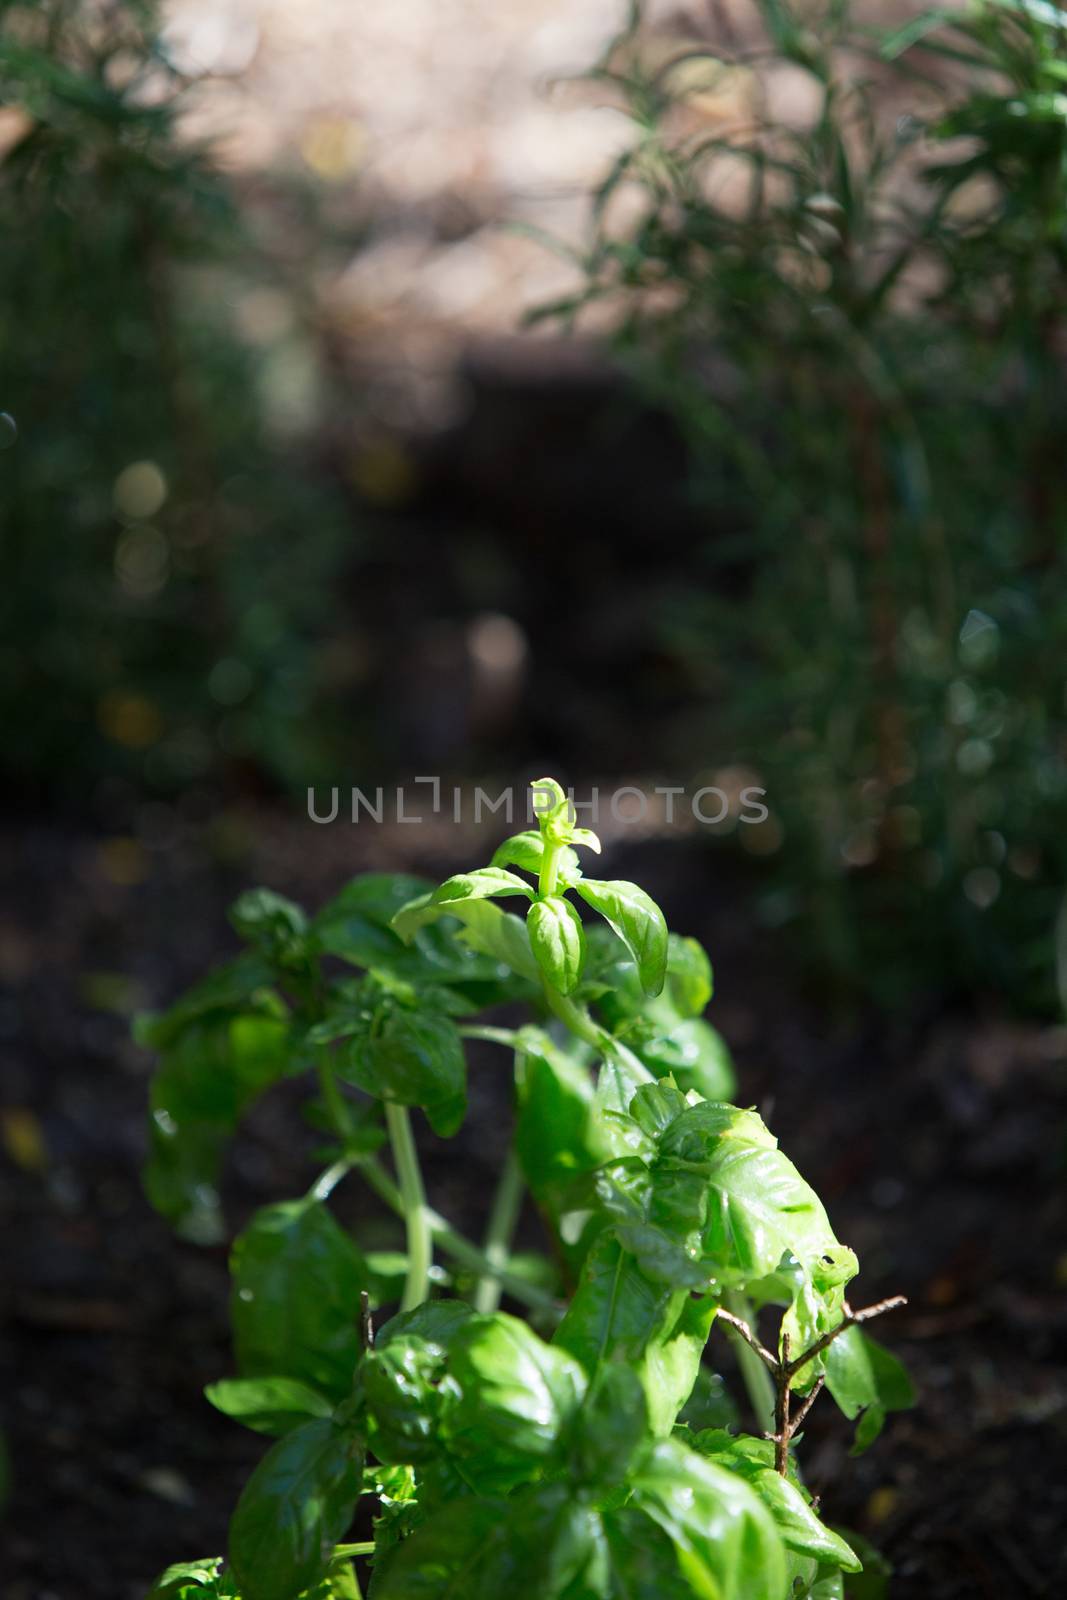 Basil sprout photographed in the morning light in selective focus with dew drops on the leaves